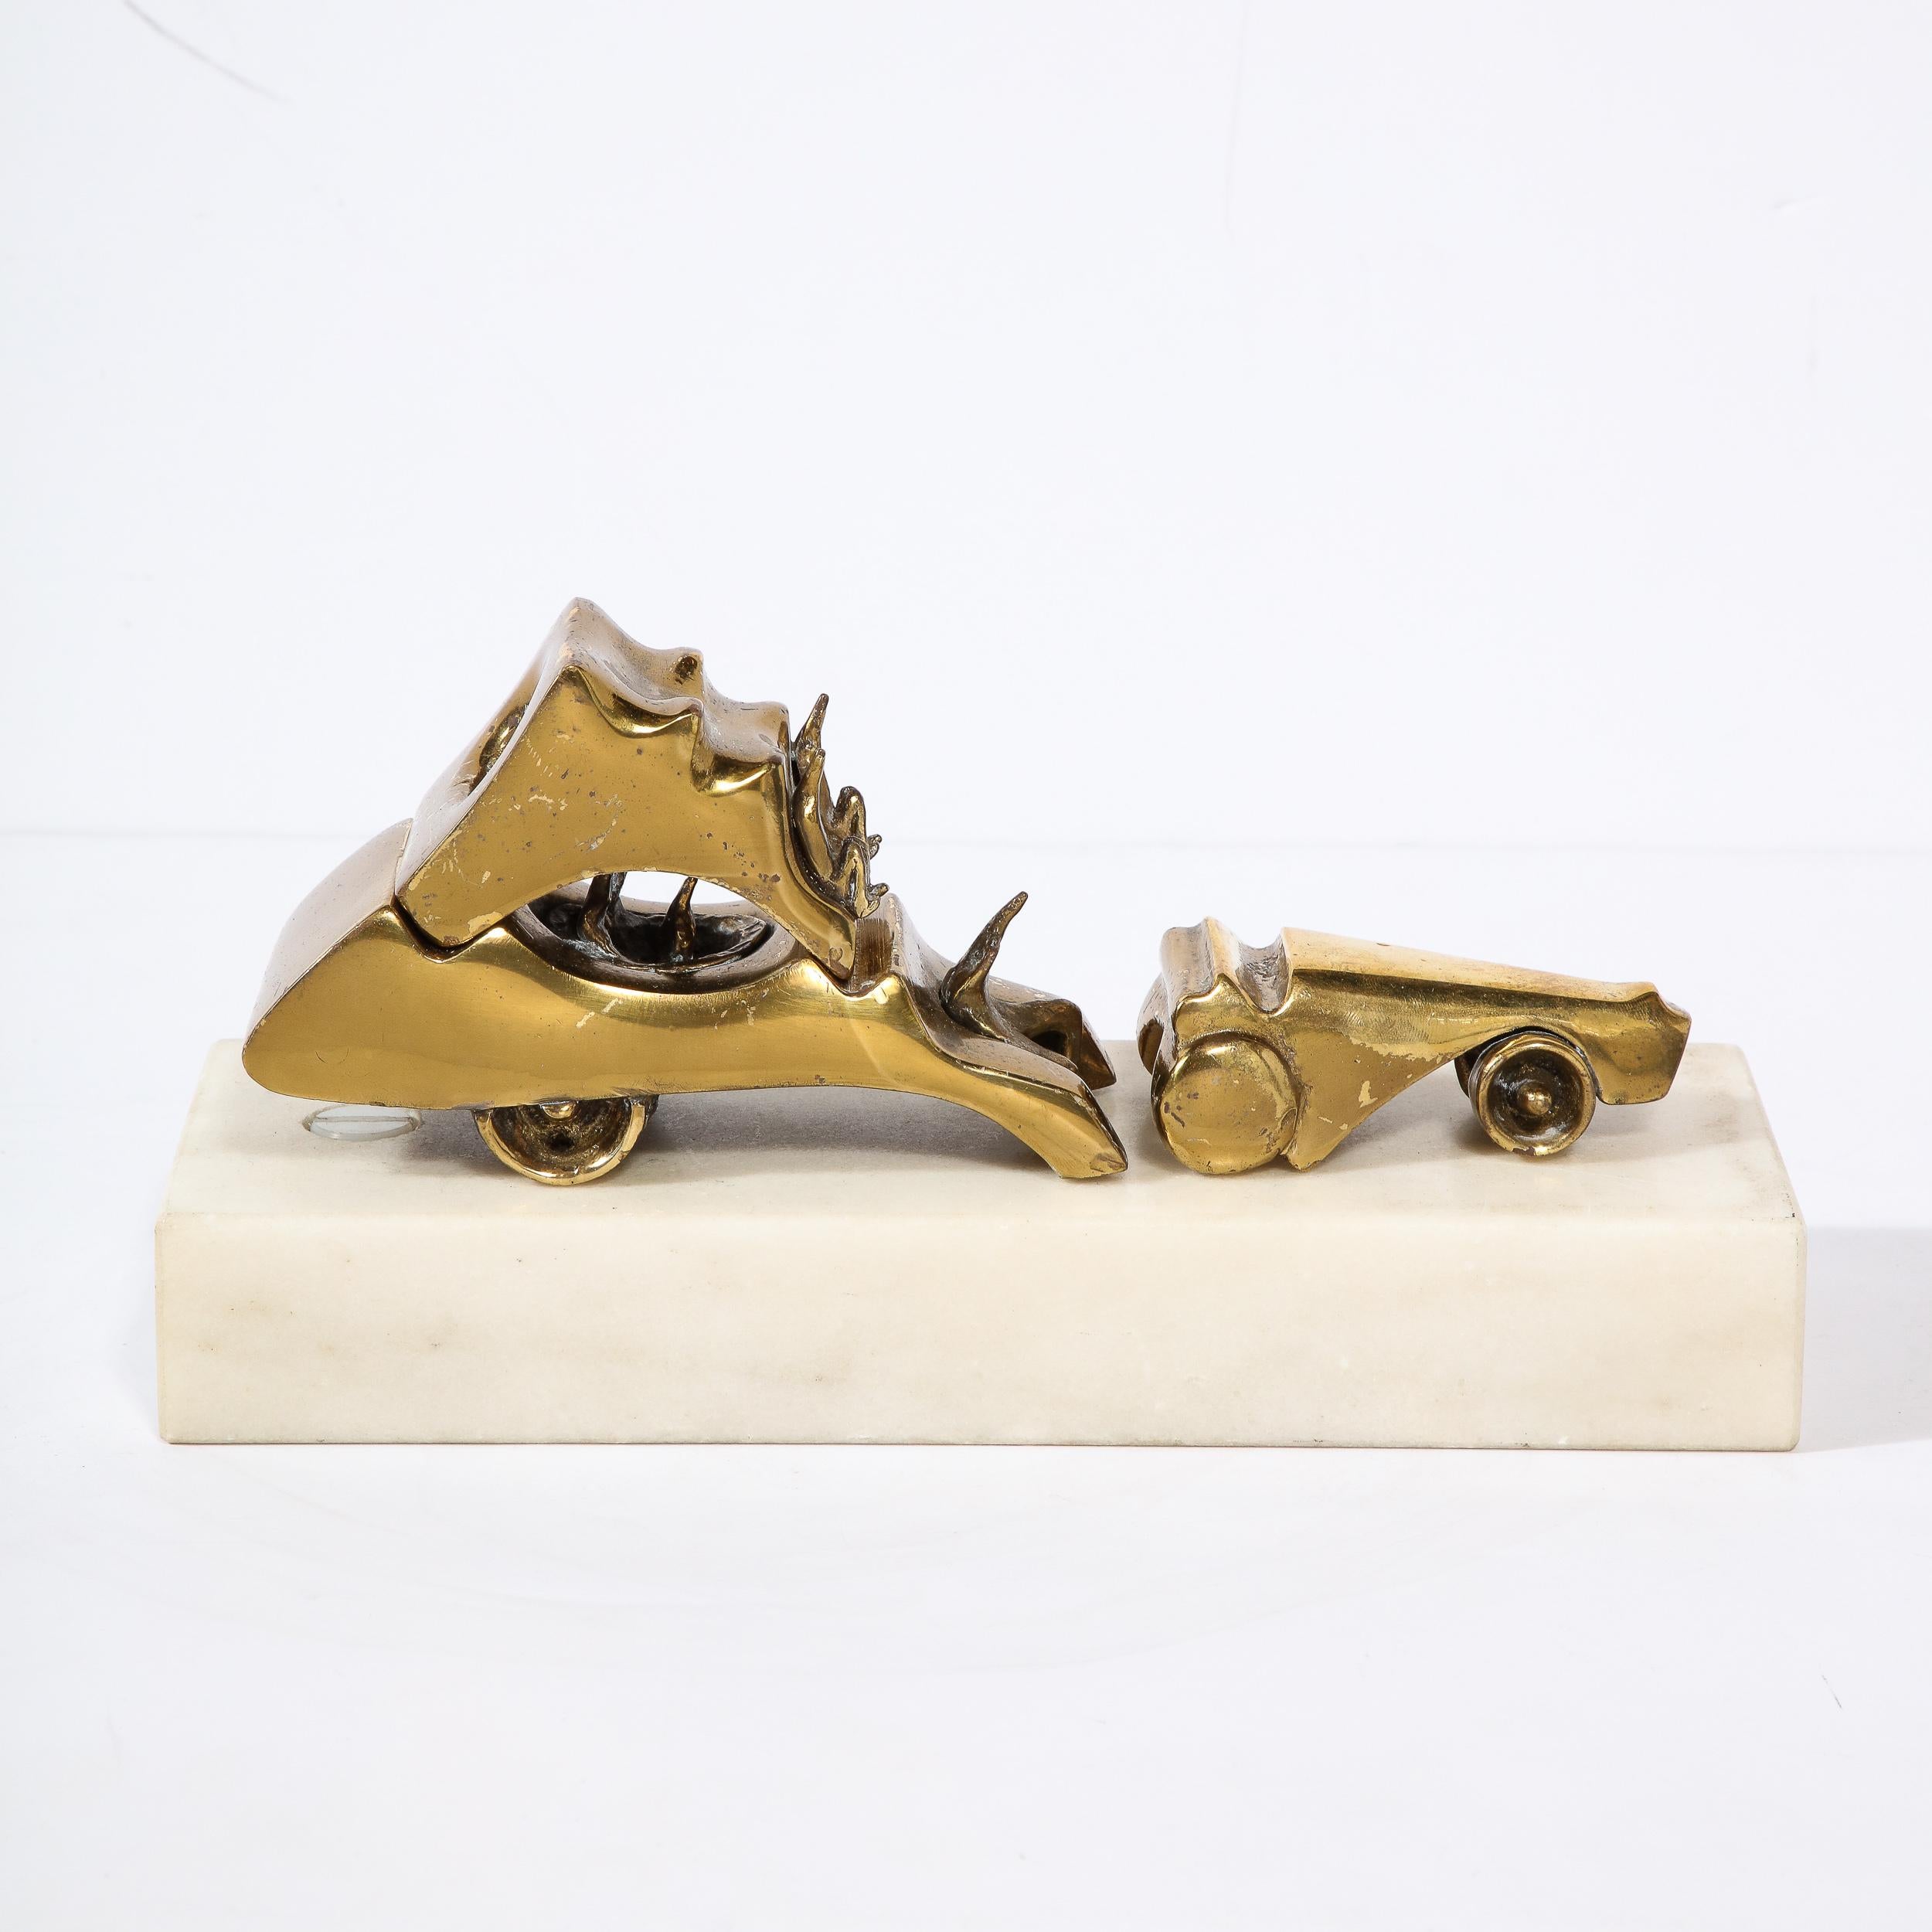 This unique and beautifully formed Modernist Car Sculpture in Brass on Marble Base is by the artist Aharon Bezalel, originating from Israel created in 1977. The sculpture is composed of multiple interlocking components, each serving as an individual